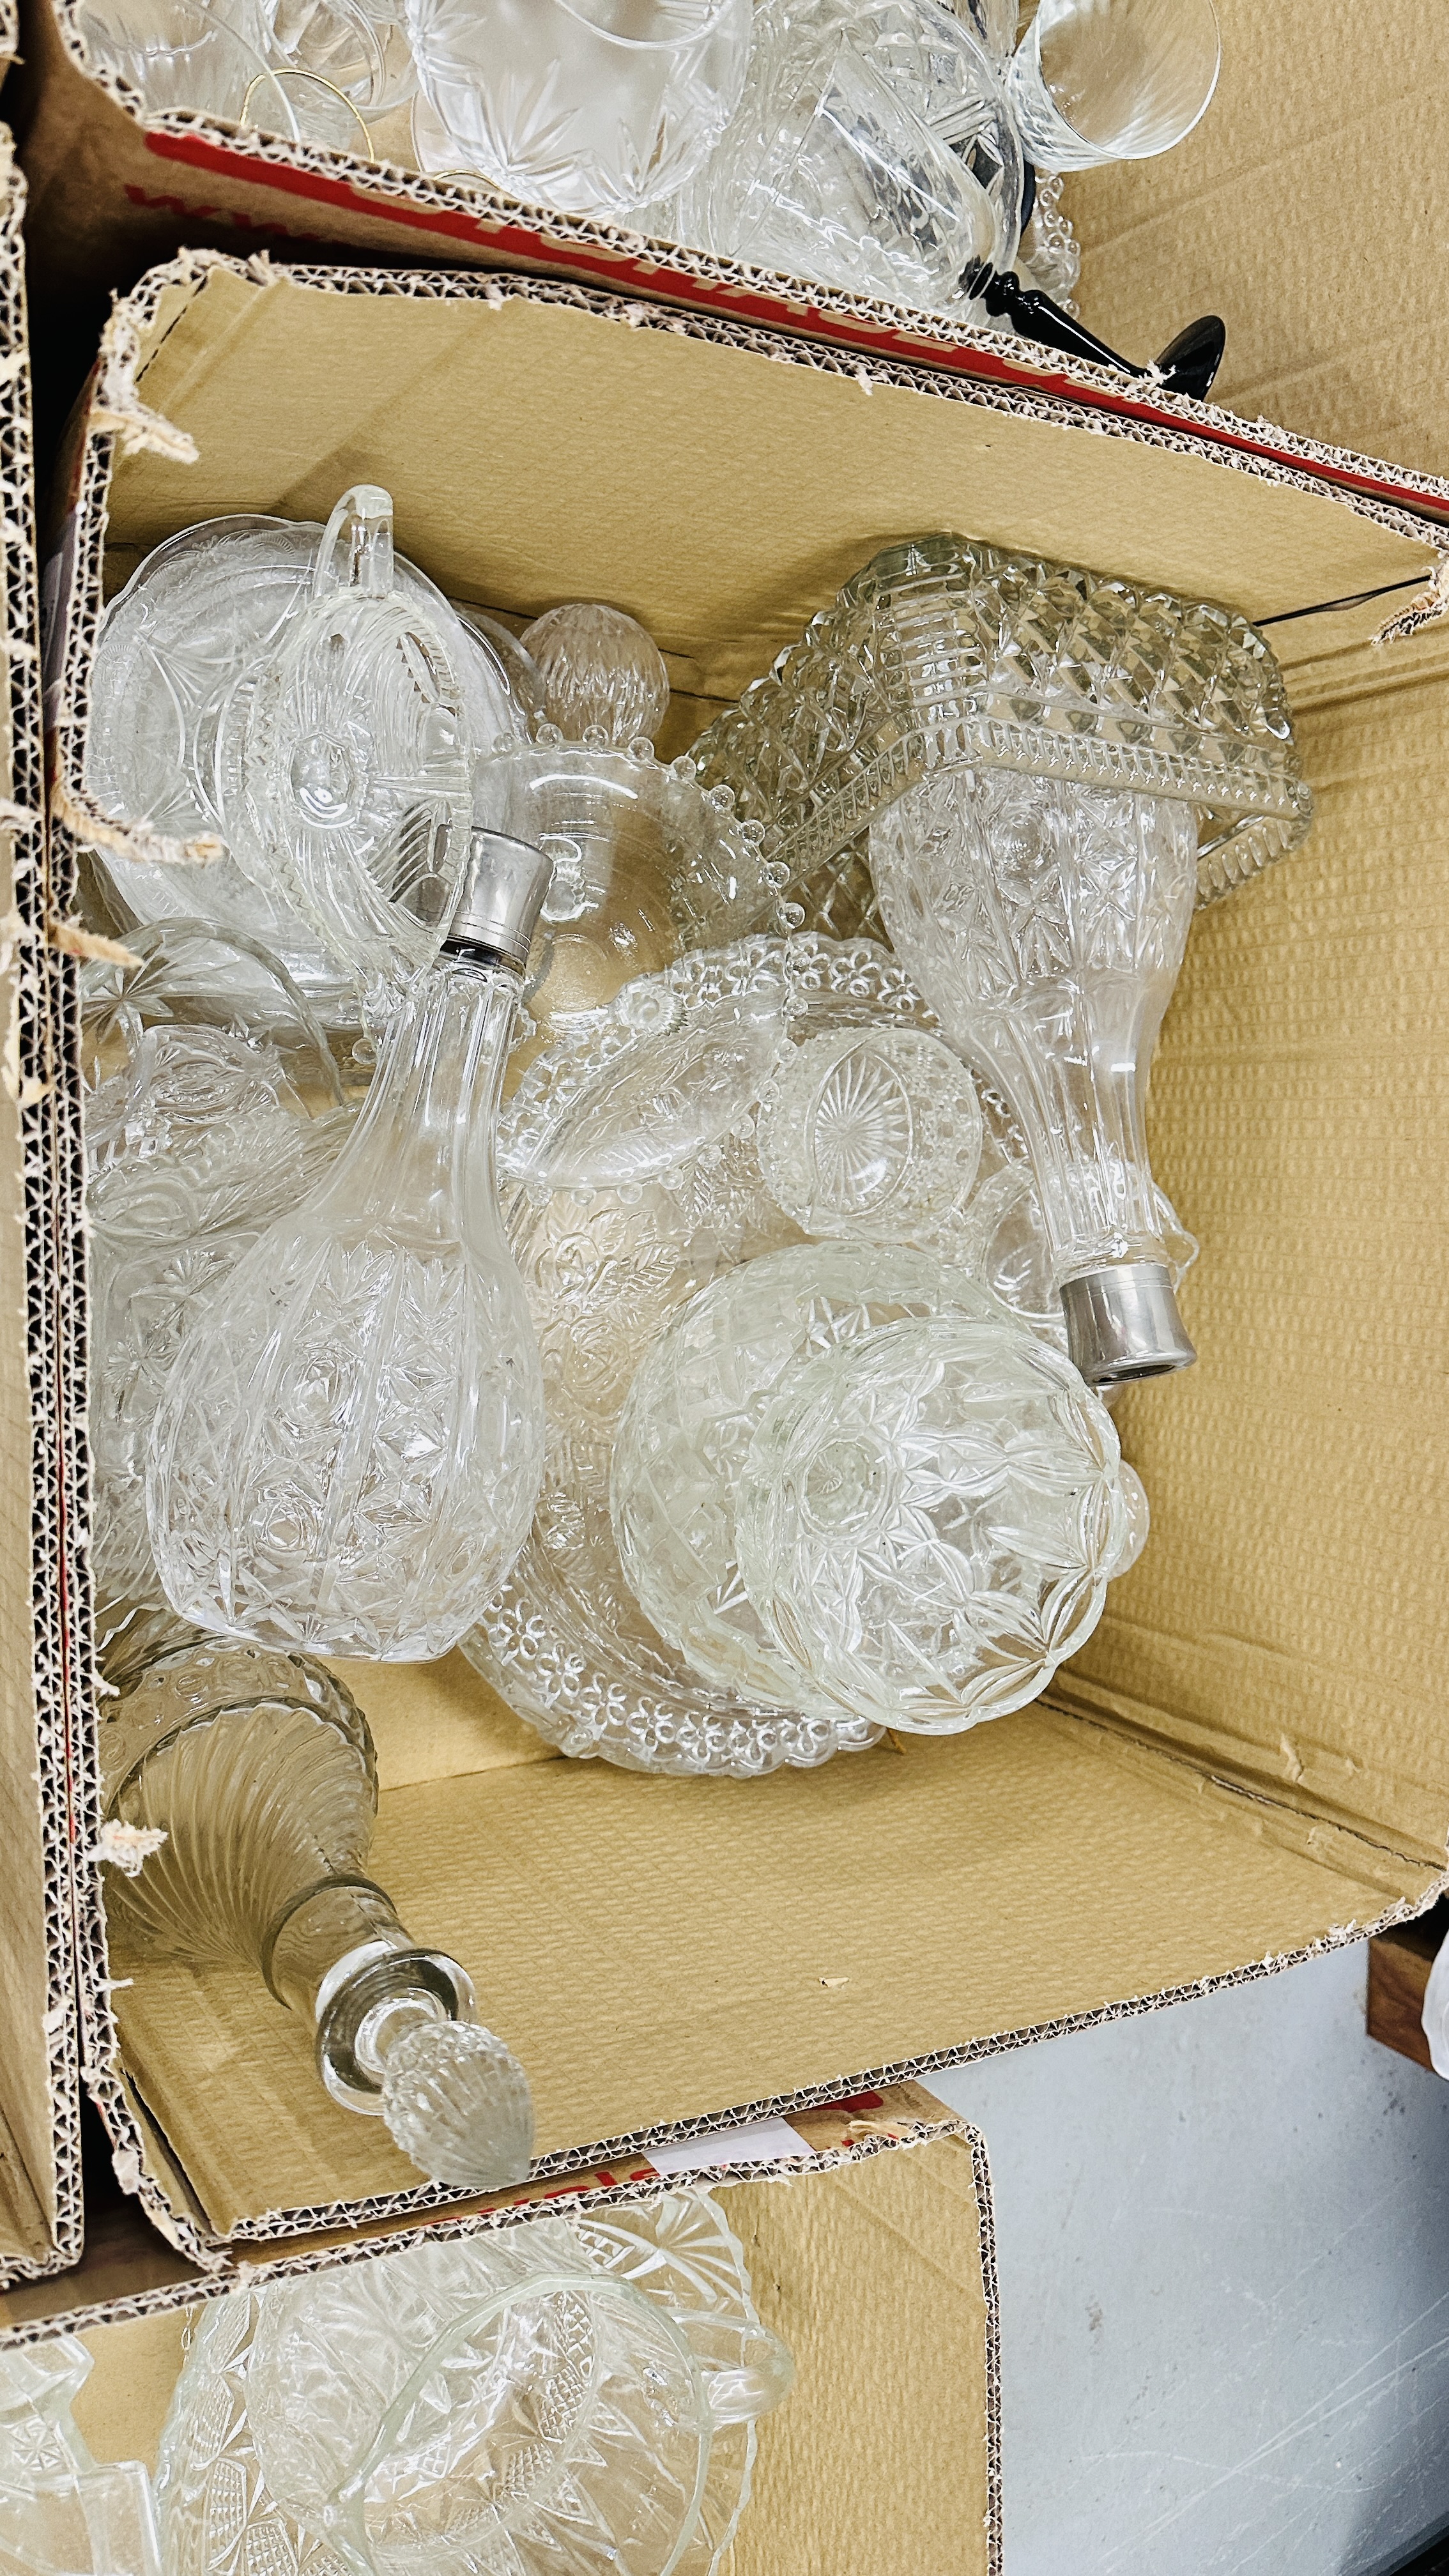 FOUR BOXES CONTAINING AN EXTENSIVE COLLECTION OF PRESSED GLASSWARE TO INCLUDE TAZZA'S, DECANTERS, - Image 6 of 6